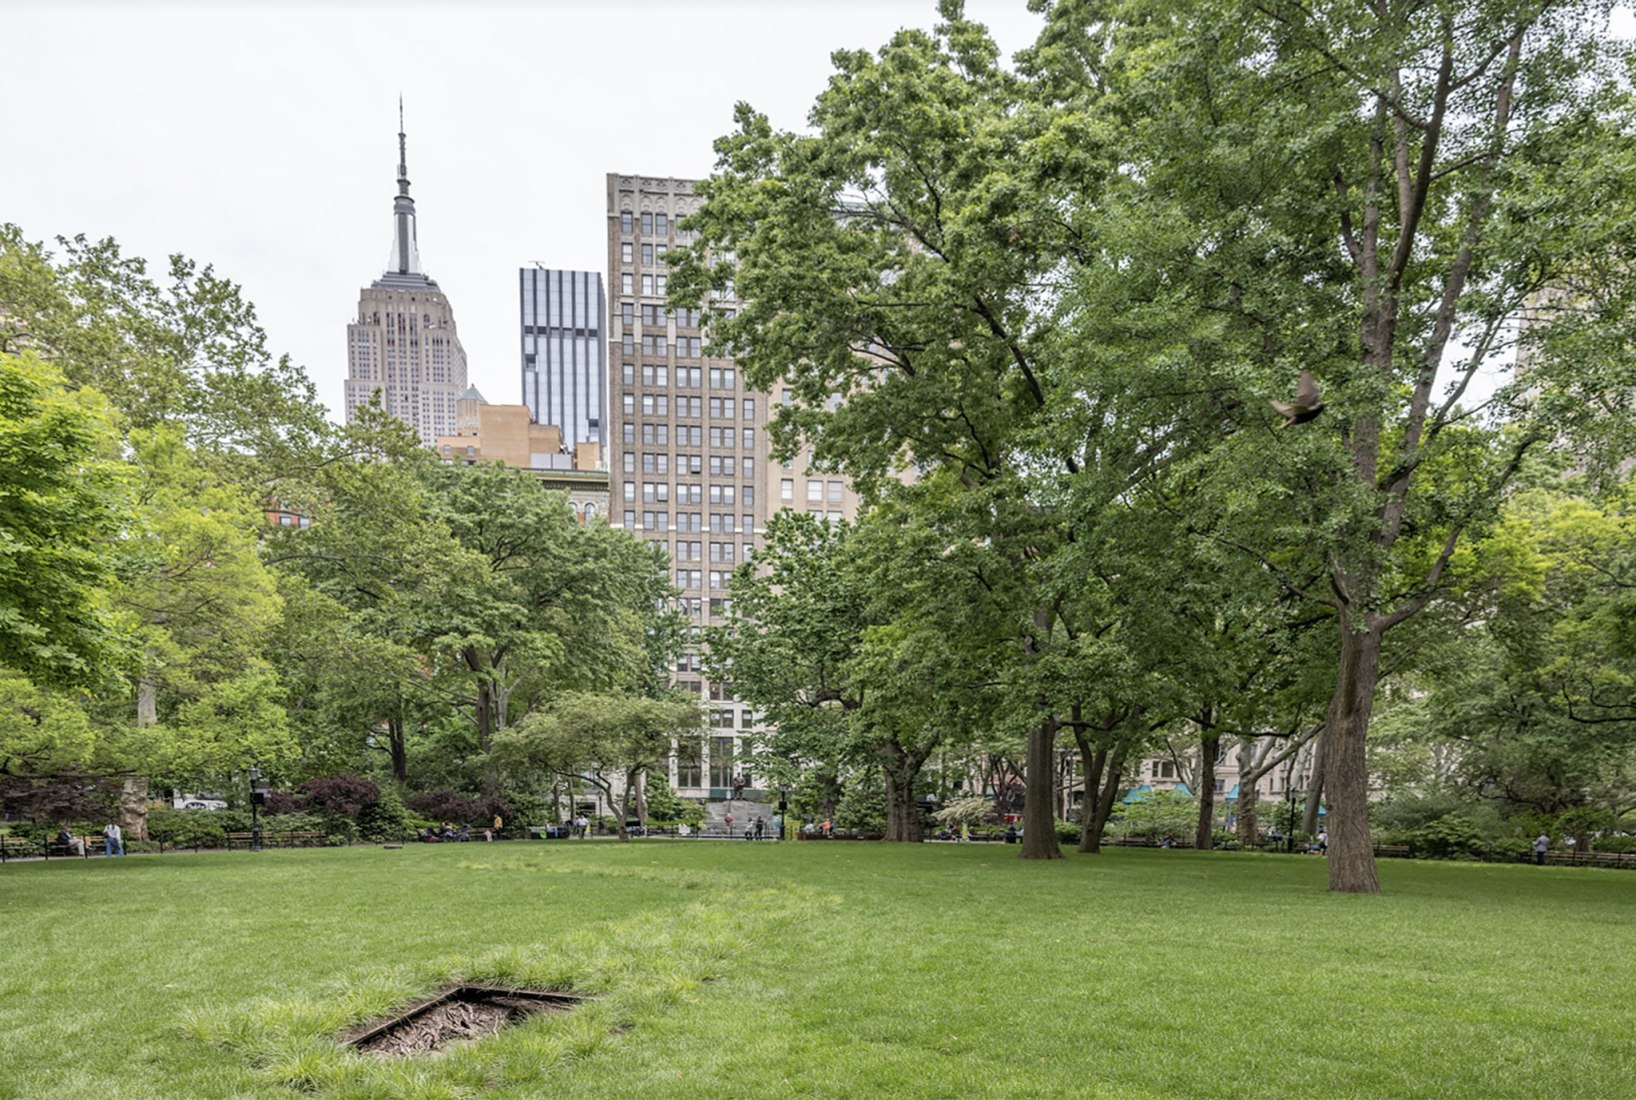 Cristina Iglesias, Landscape and Memory, 2022. Photograph by Rashmi Gill. Courtesy of the artist and Madison Square Park Conservancy